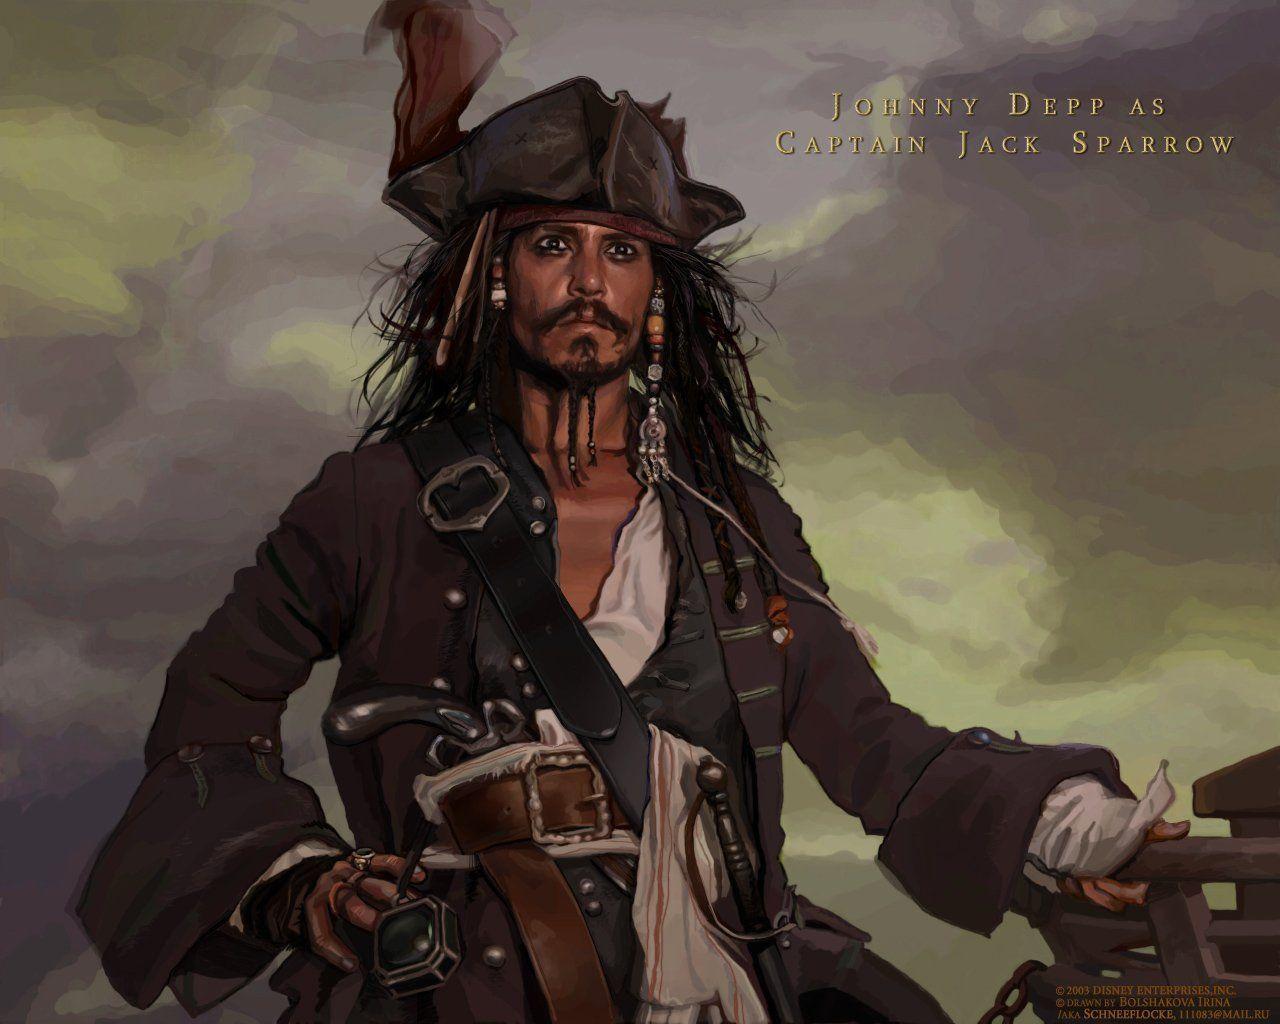 Pirates Of The Caribbean HD Wallpaper. Background